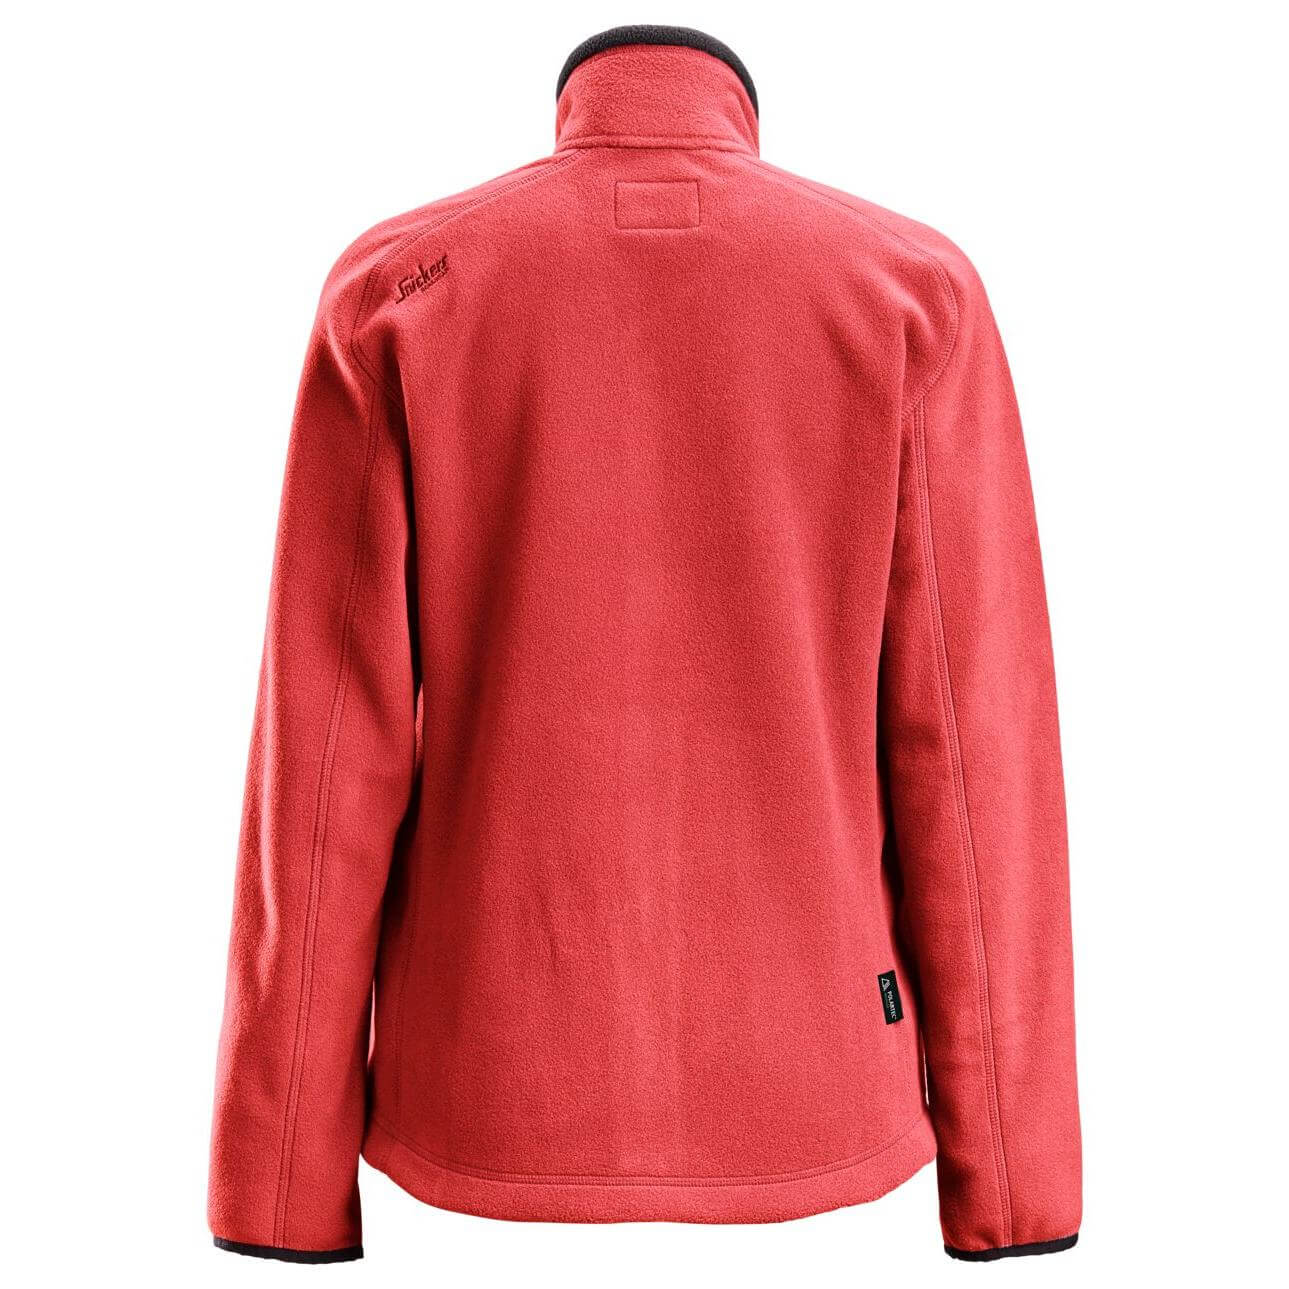 Snickers 8027 AllroundWork Polartec Womens Fleece Jacket Chili Red Black back #colour_chili-red-black